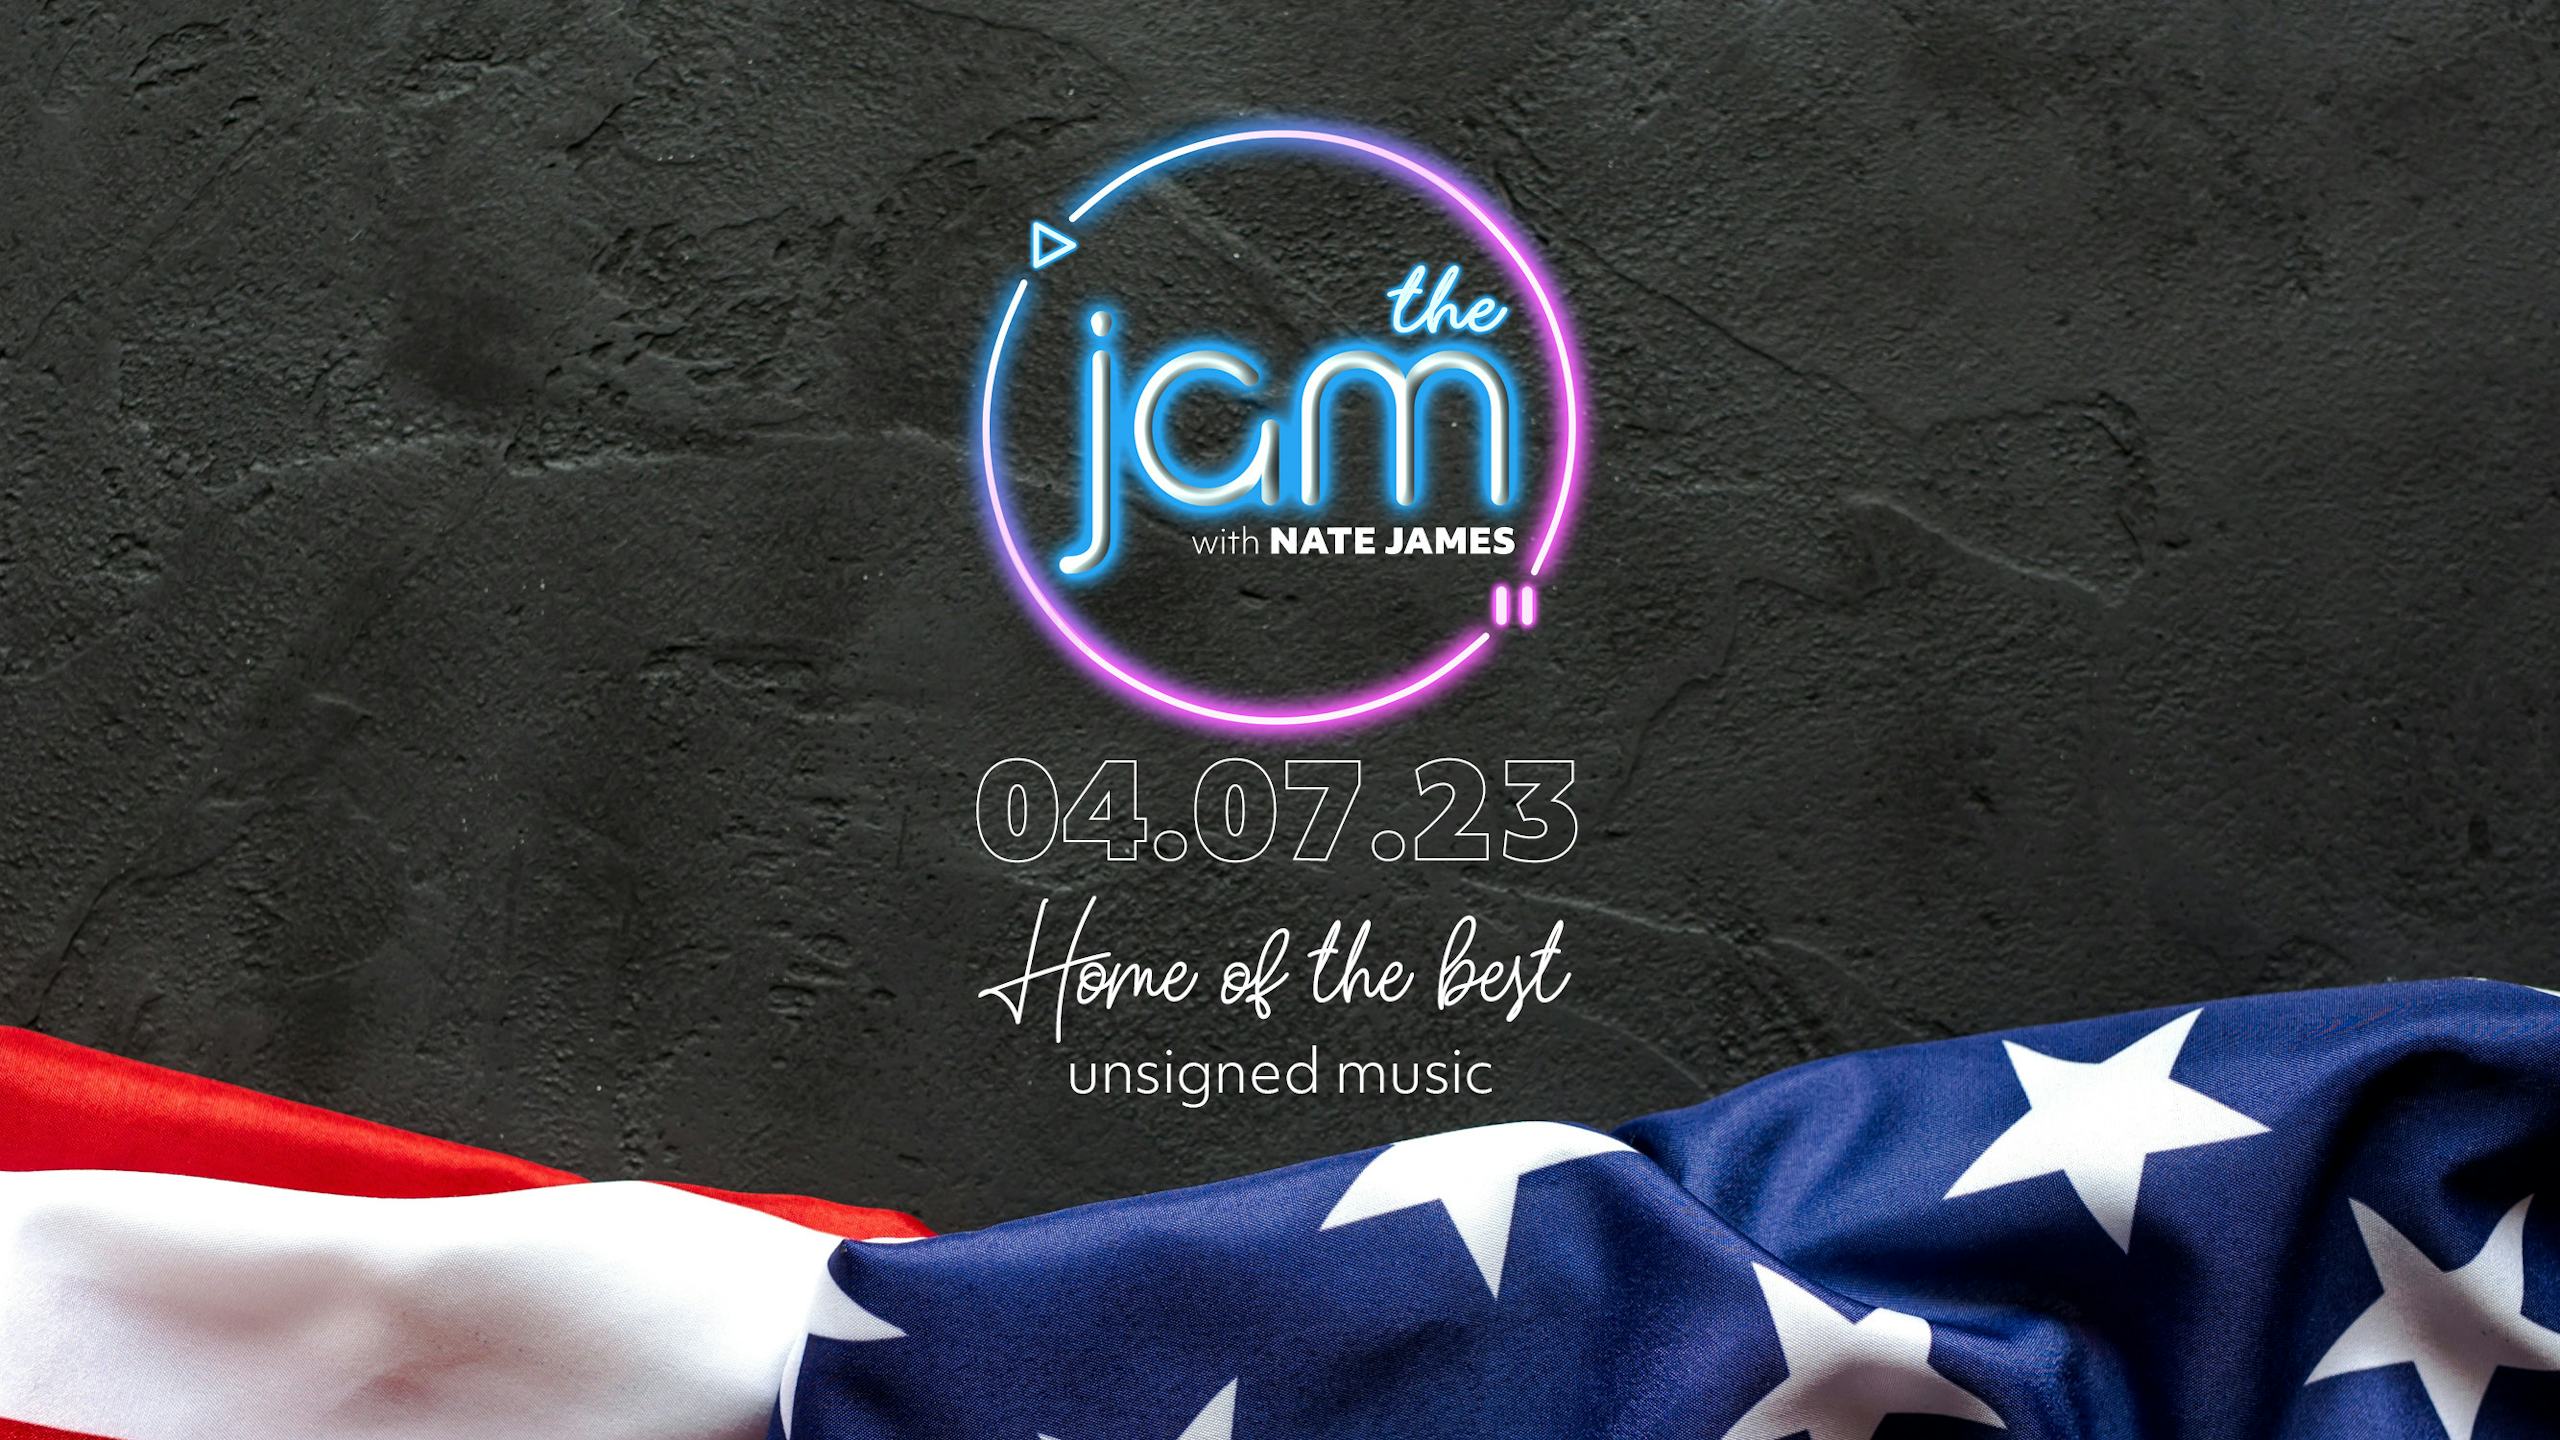 The 4th of July Special Jam with Nate James